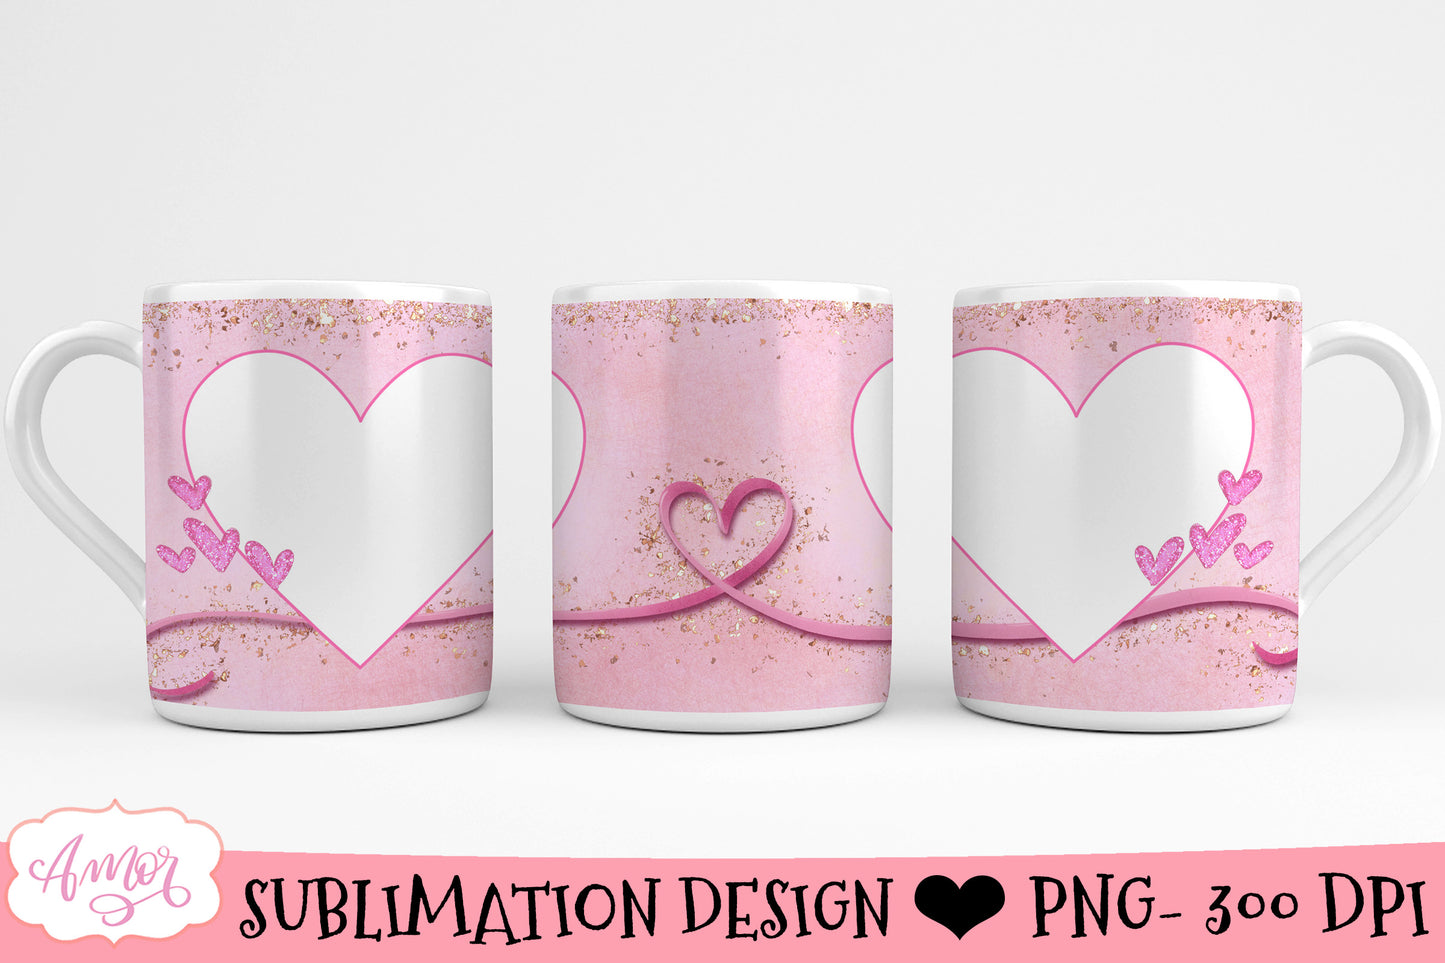 Add your own photos mug template for sublimation